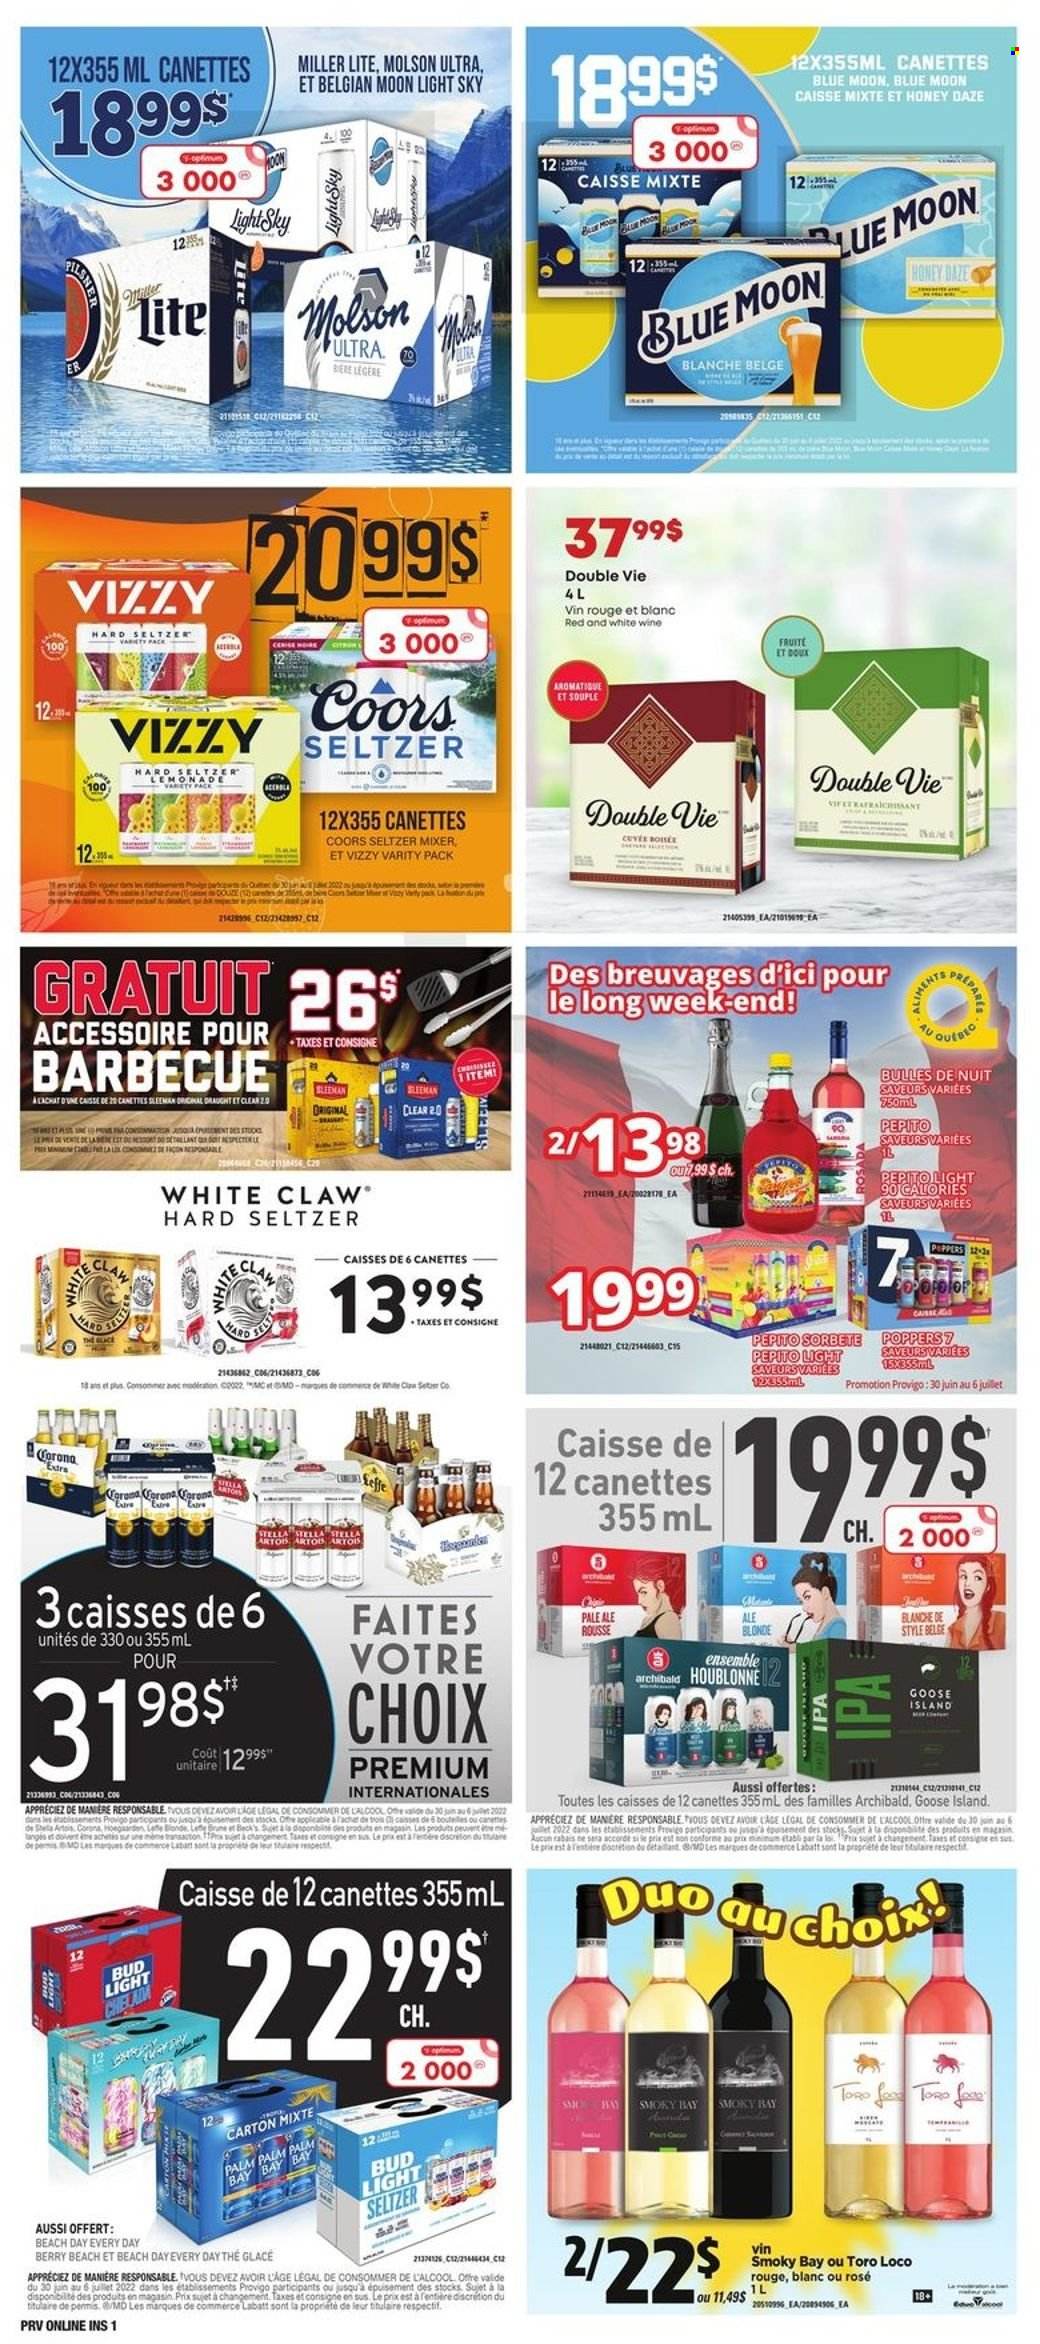 thumbnail - Provigo Flyer - June 30, 2022 - July 06, 2022 - Sales products - honey, wine, Cuvée, rosé wine, White Claw, Hard Seltzer, beer, Bud Light, Corona Extra, Beck's, IPA, Optimum, brace, Miller Lite, Coors, Blue Moon. Page 9.